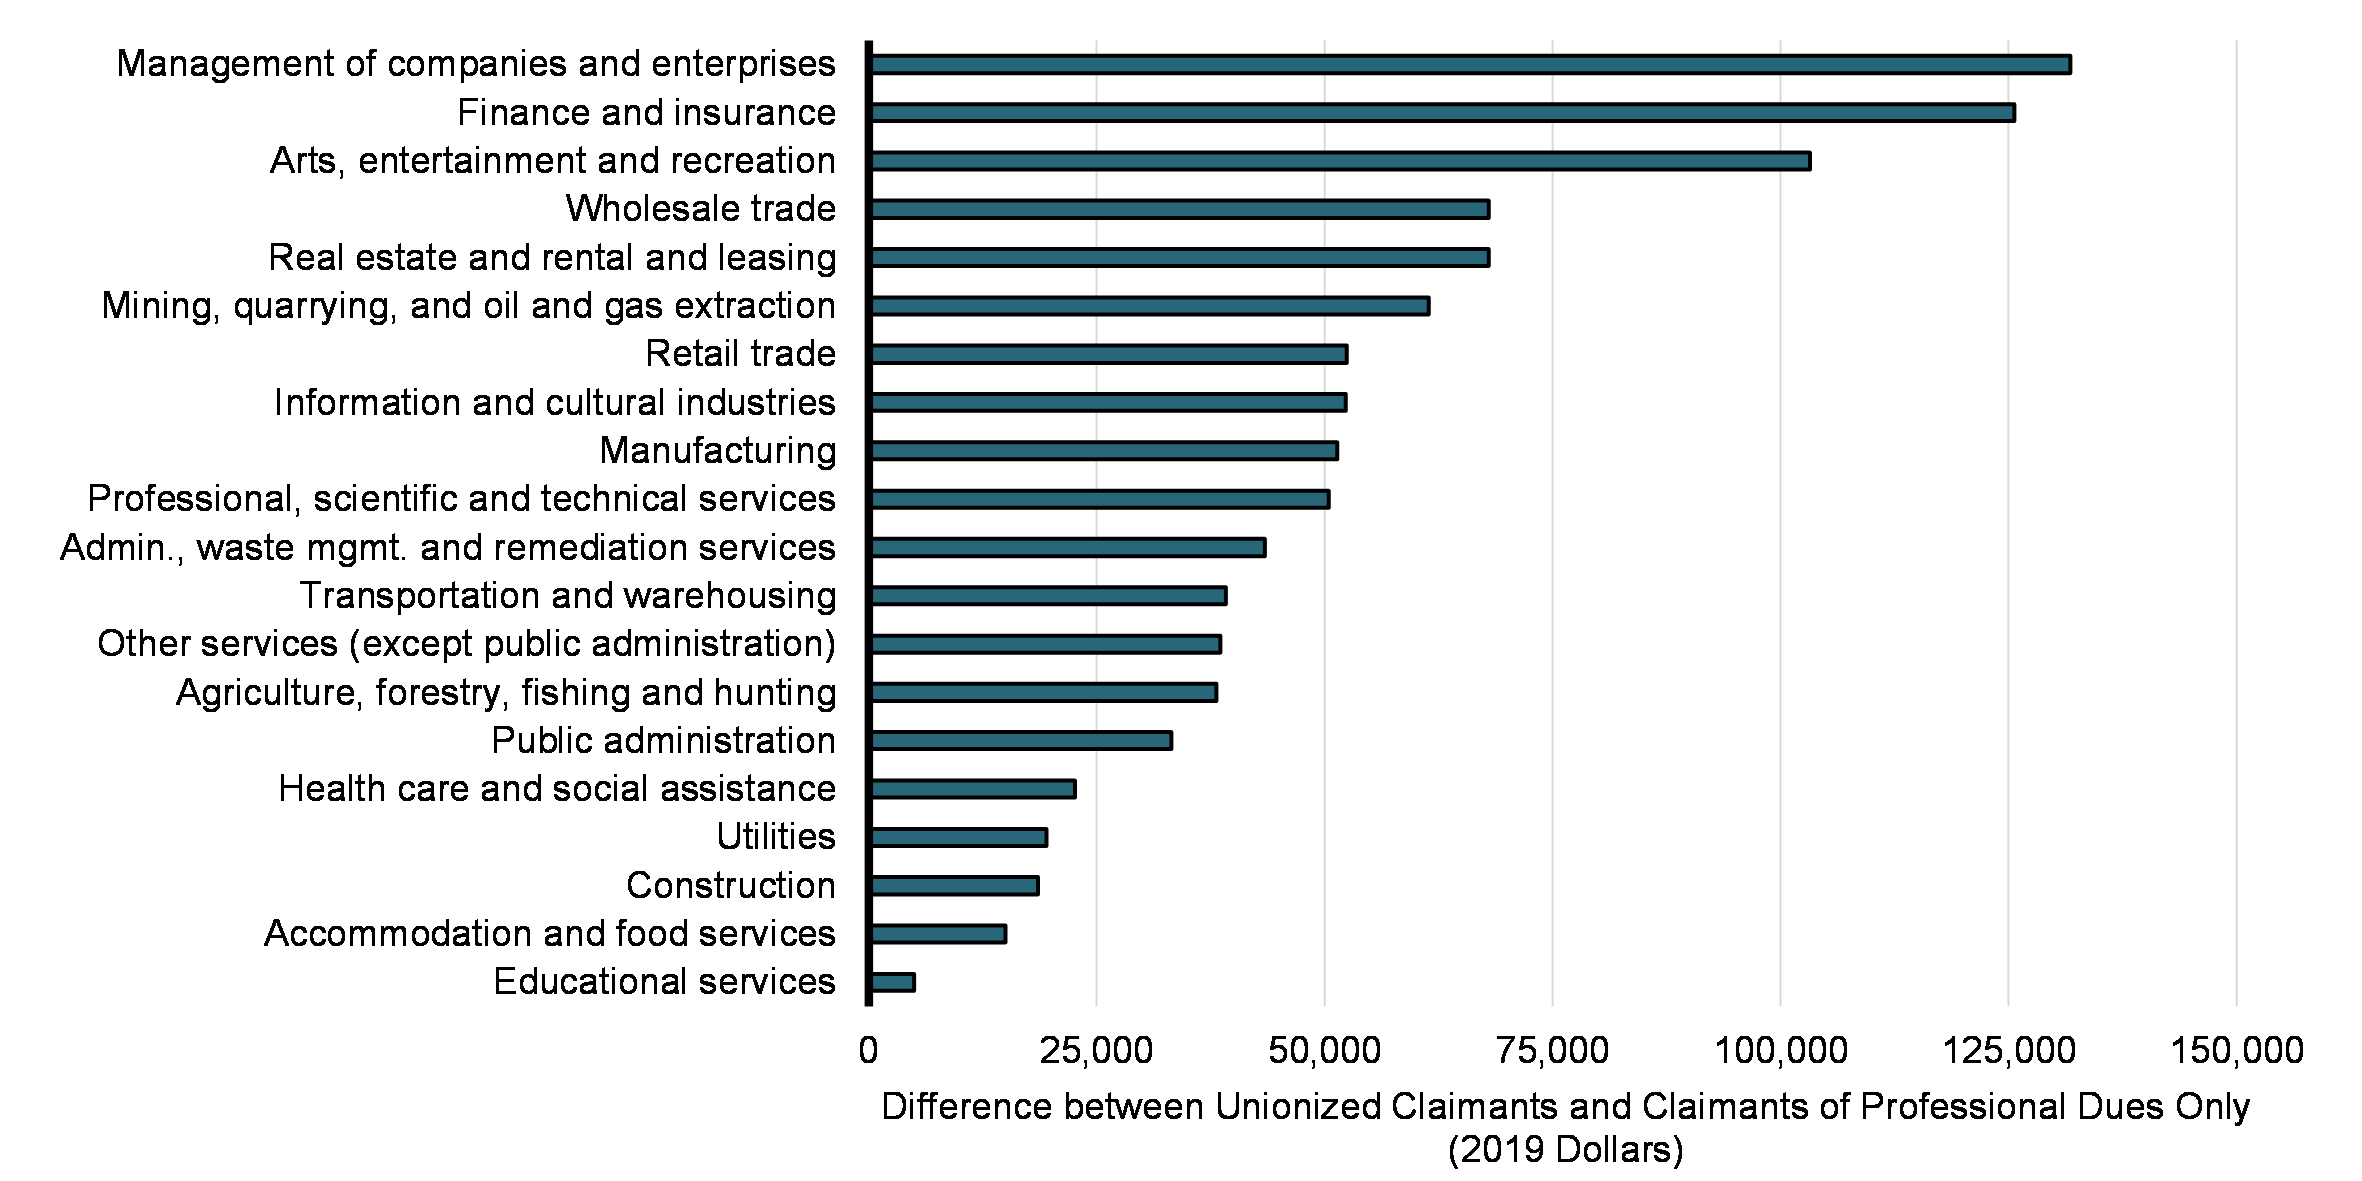 Chart 18: Difference in Average Incomes between Unionized Claimants and Claimants of Professional Dues Only, by 2-Digit NAICS Industry (2019), in 2019 Dollars